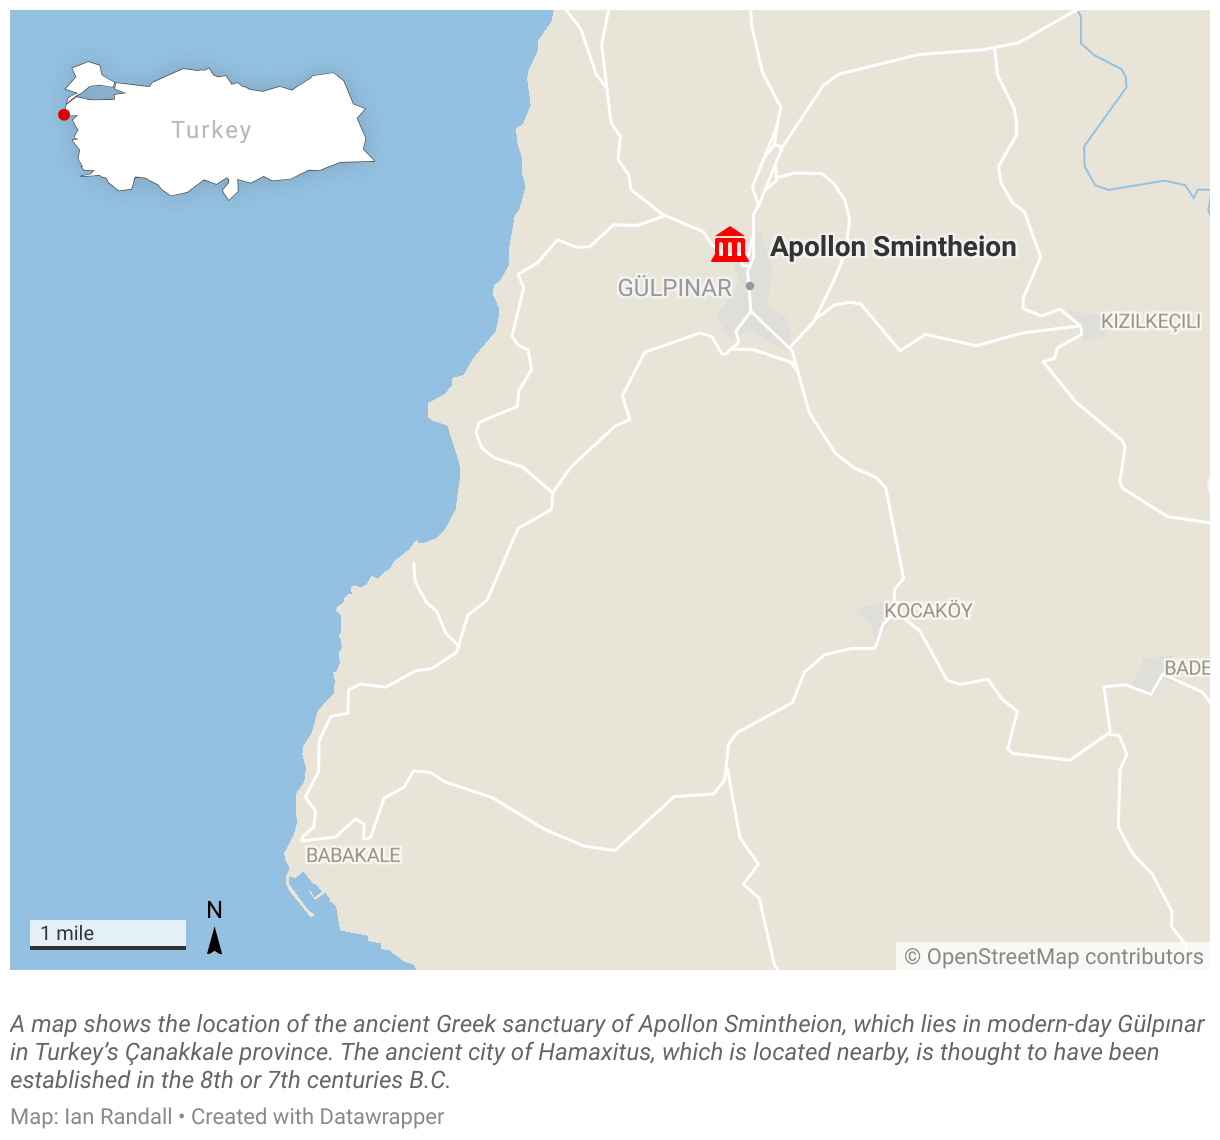 A map shows the location of the ancient Greek sanctuary of Apollon Smintheion, which lies in modern-day Gülpınar in Turkey’s Çanakkale province.